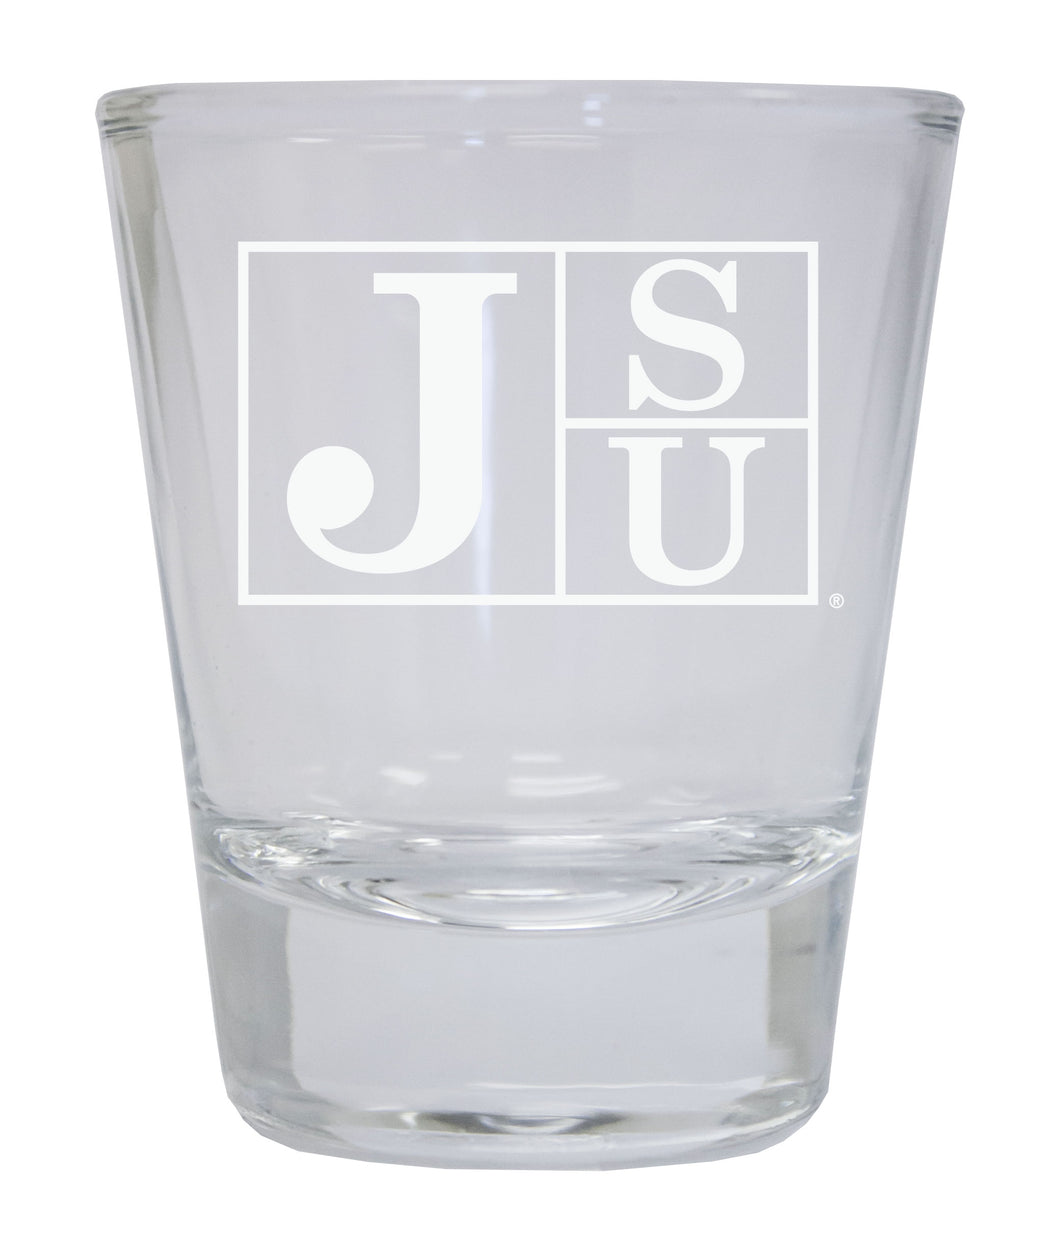 Jackson State University Etched Round Shot Glass Officially Licensed Collegiate Product